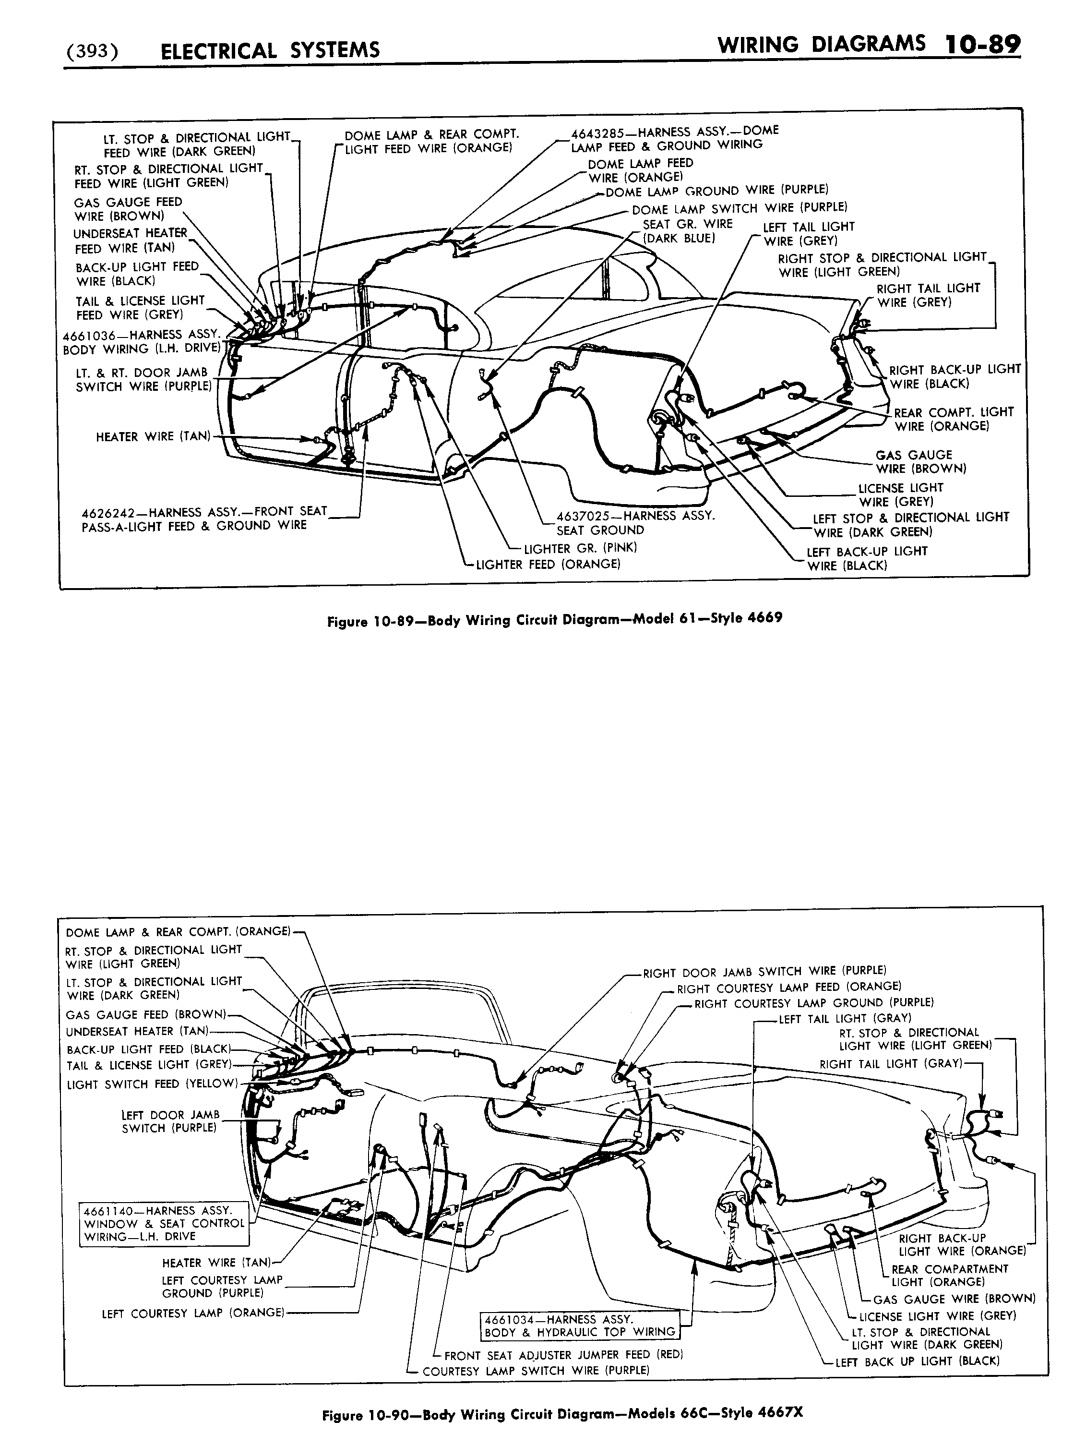 n_11 1955 Buick Shop Manual - Electrical Systems-089-089.jpg